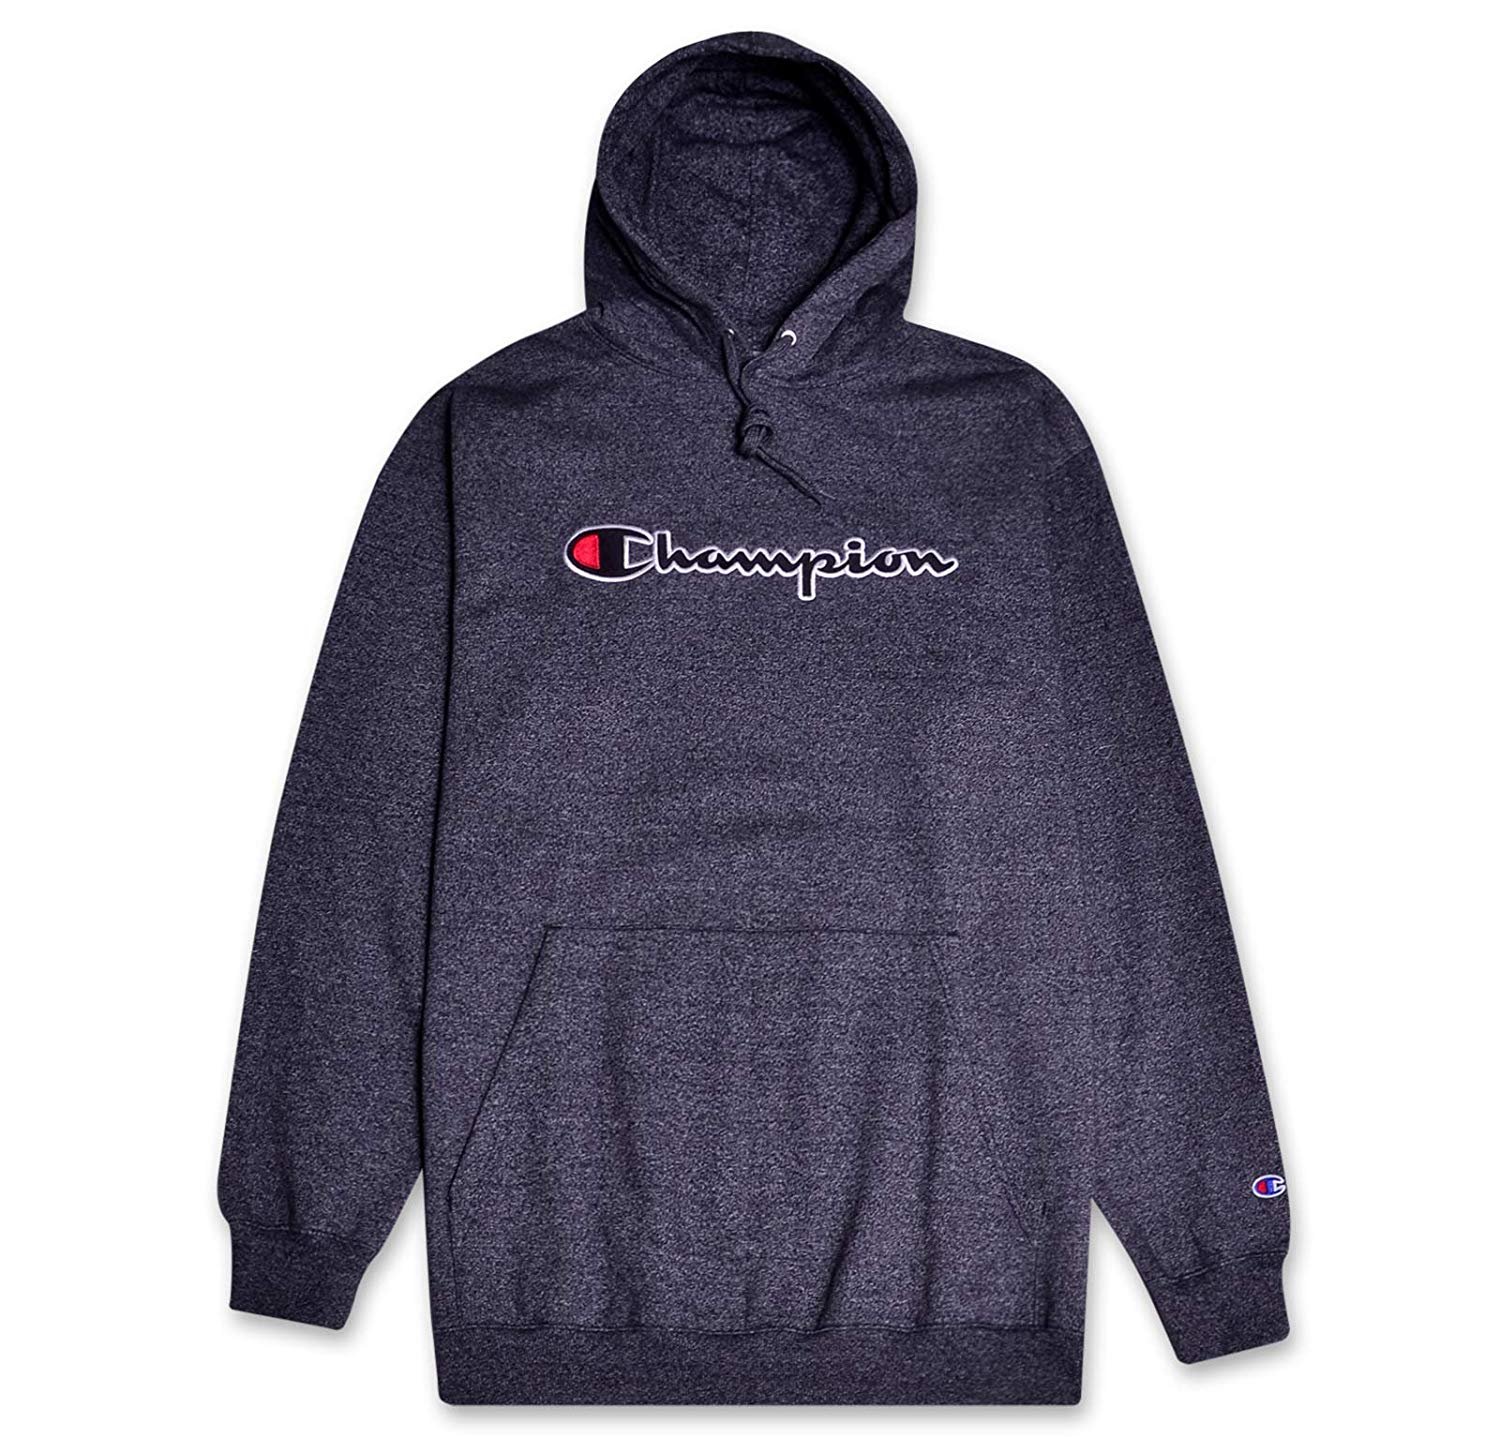 Champion Mens Big and Tall Fleece Pullover Hoodie 